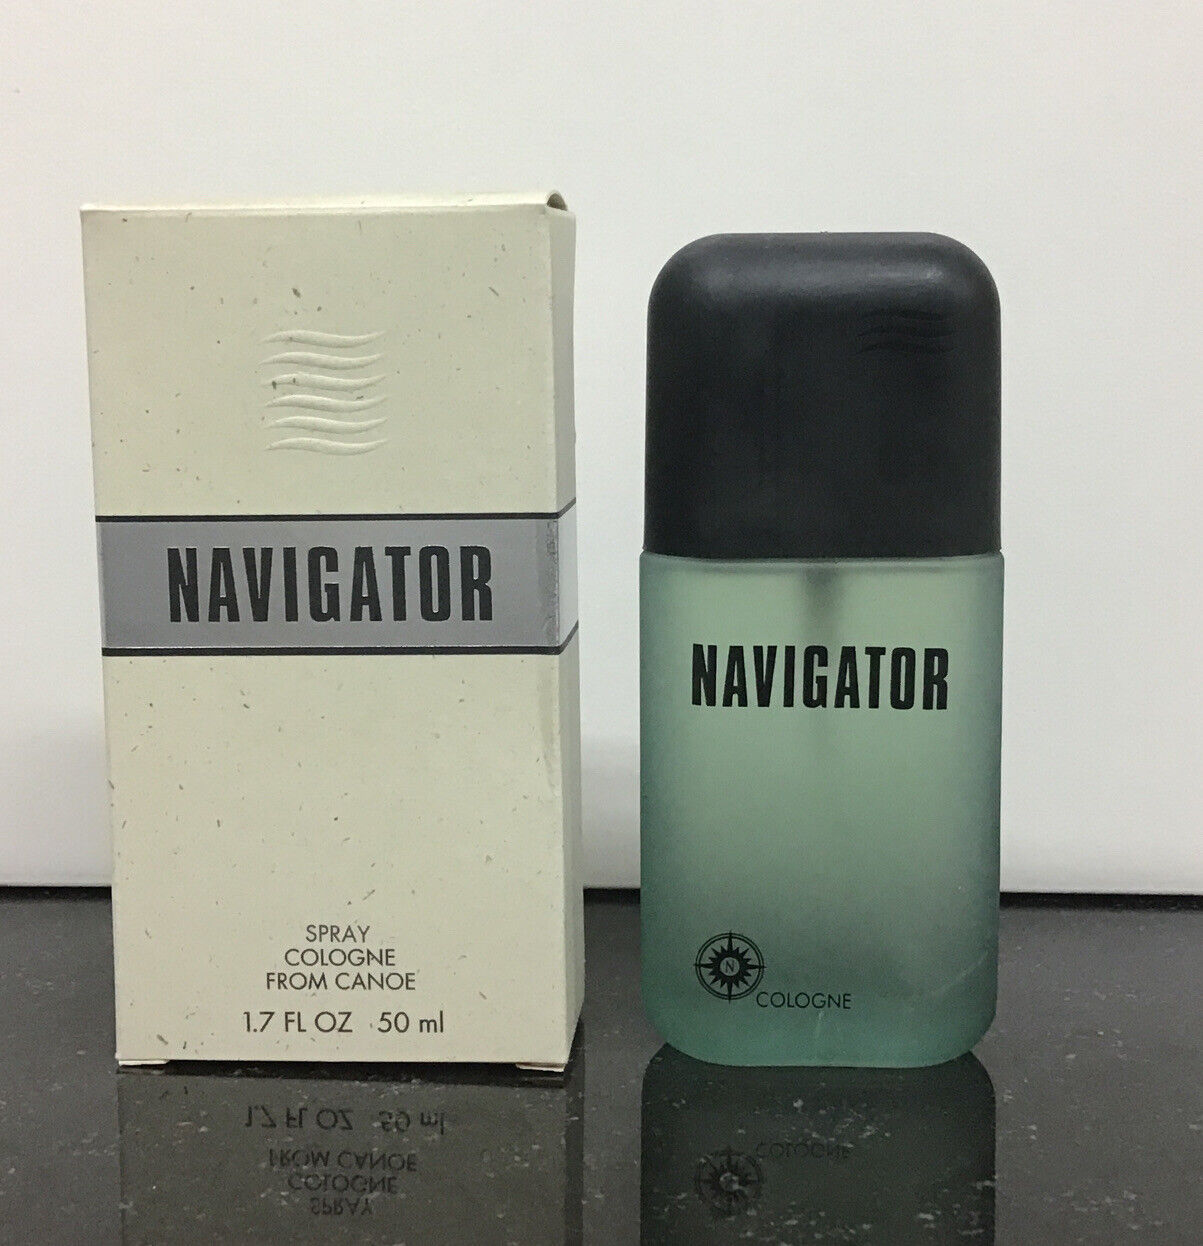 NAVIGATOR- SPRAY COLOGNE FROM CANOE- 1.7 oz.| NIB | As Pictured